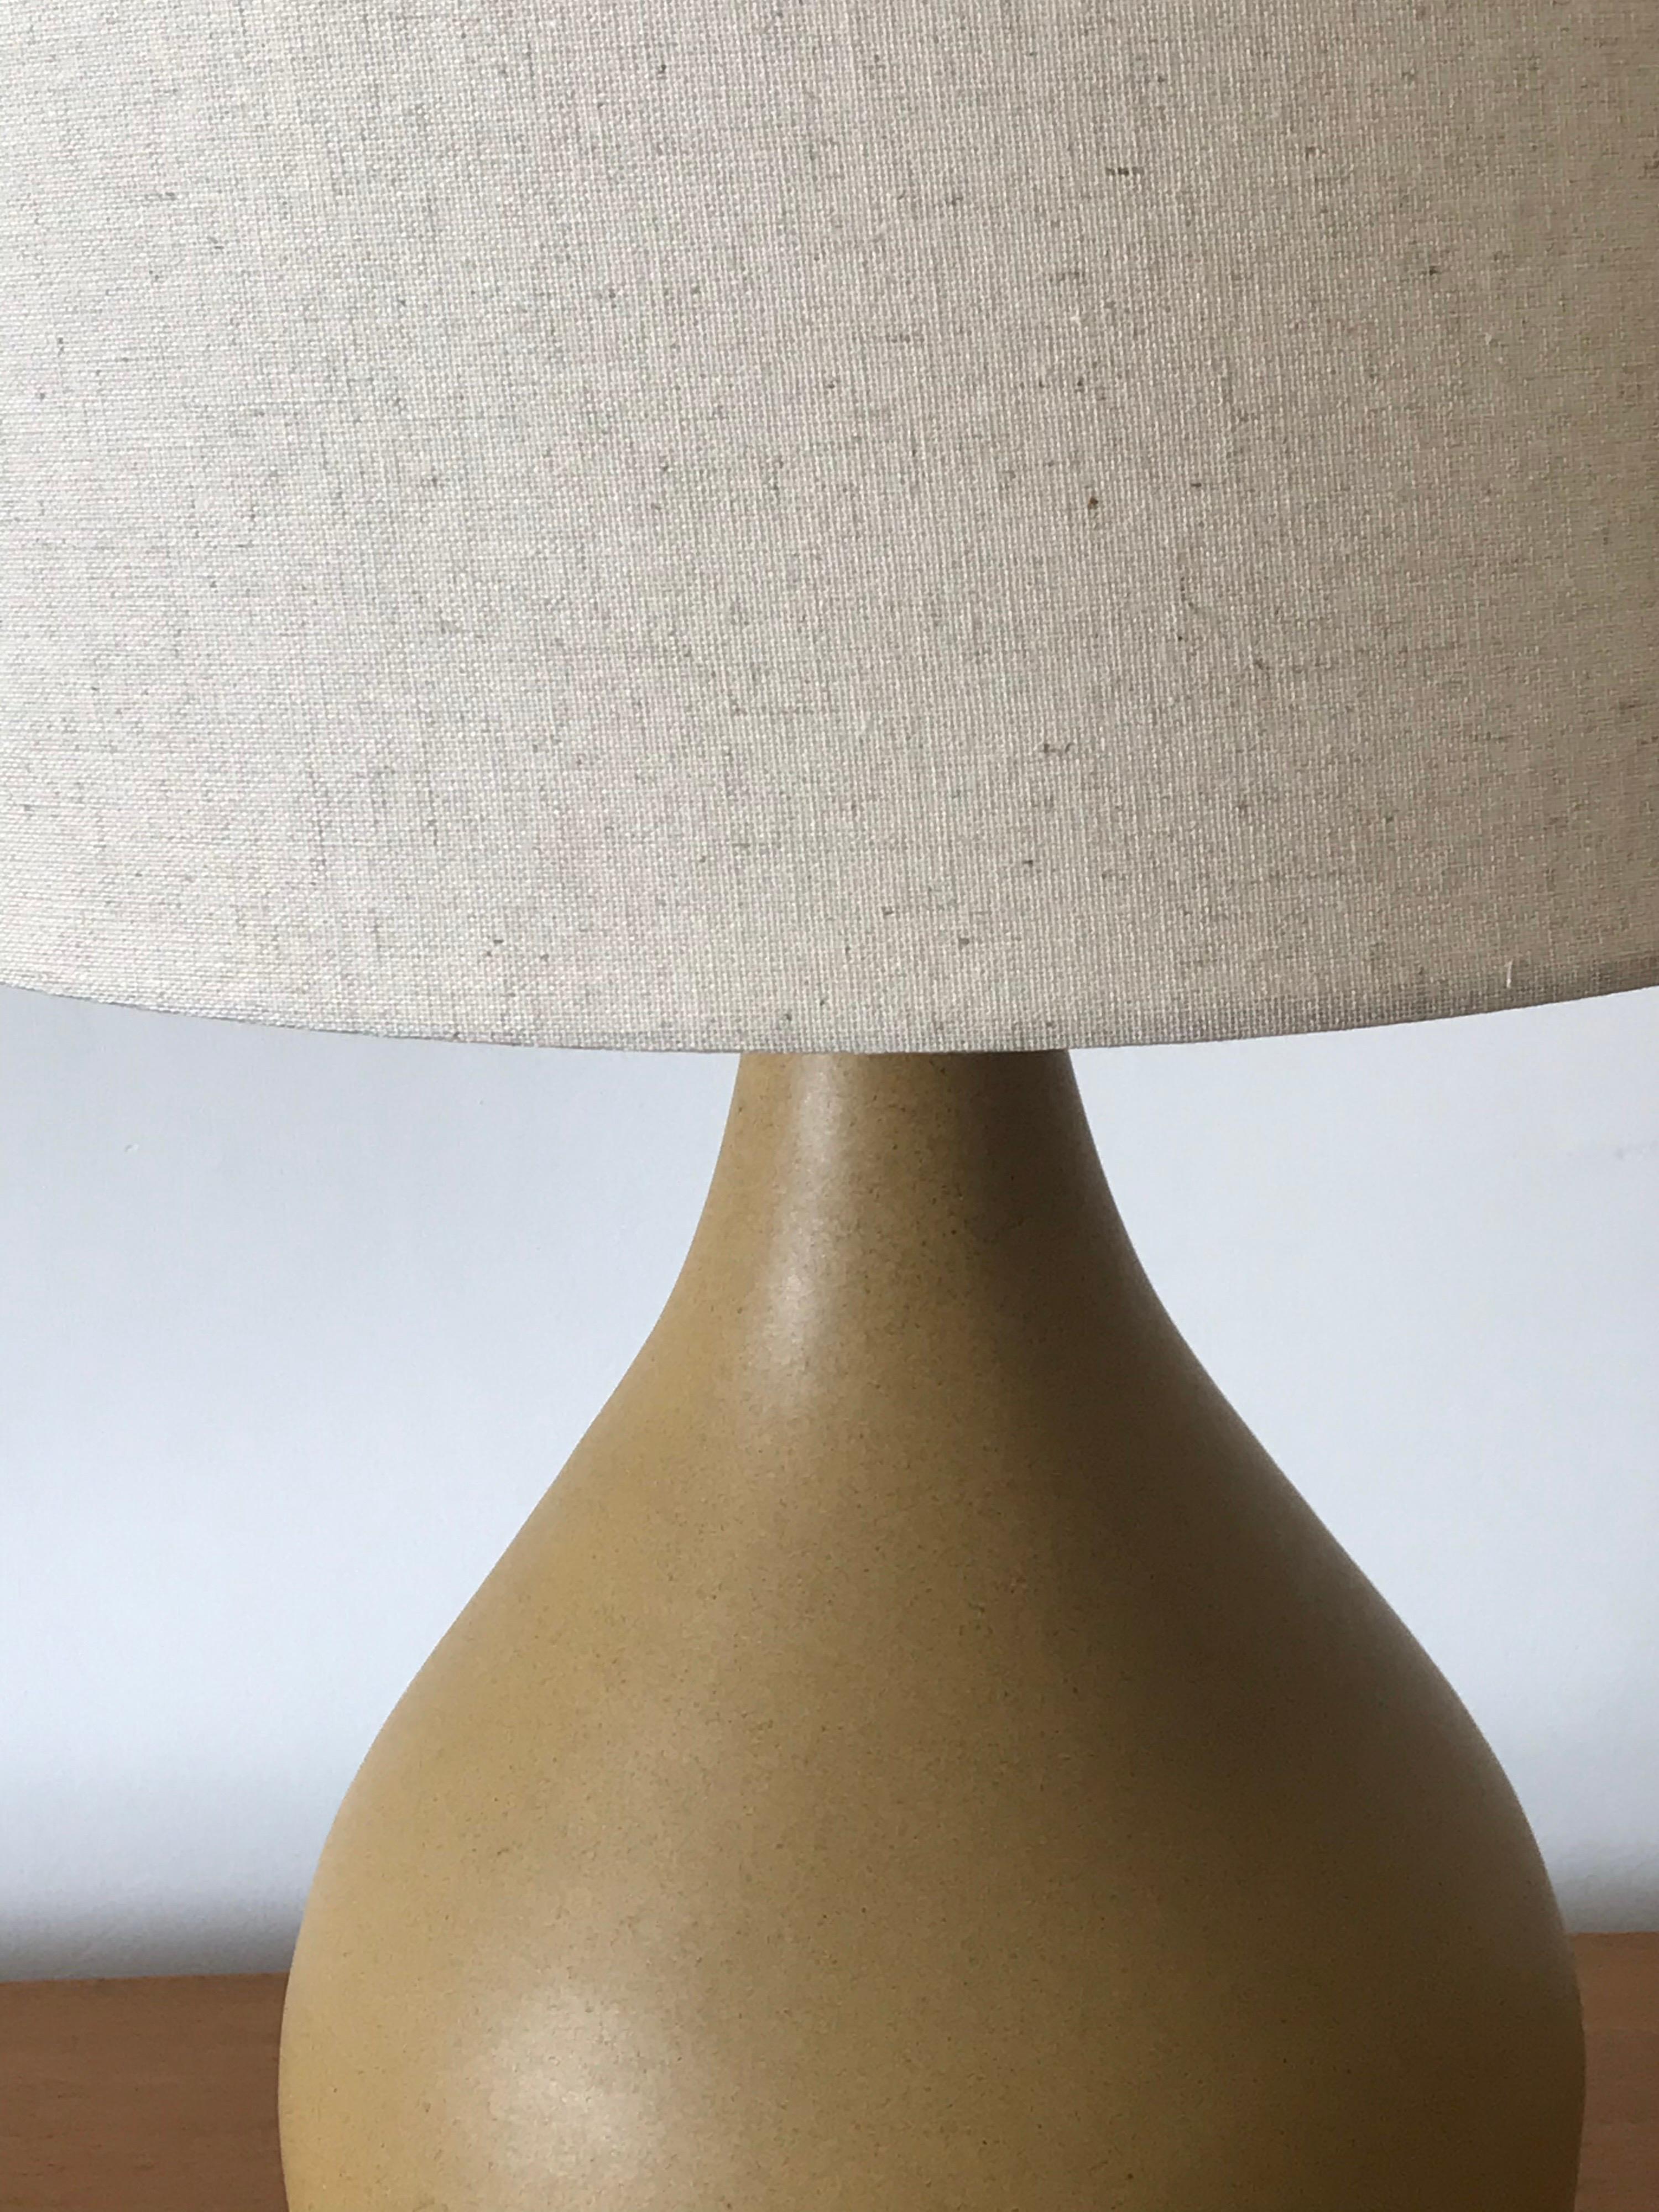 Stunning ochre colored flat glaze table lamp by Jane and Gordon Martz. Wonderful teardrop form. New shade and finial.

Measures: Overall
26